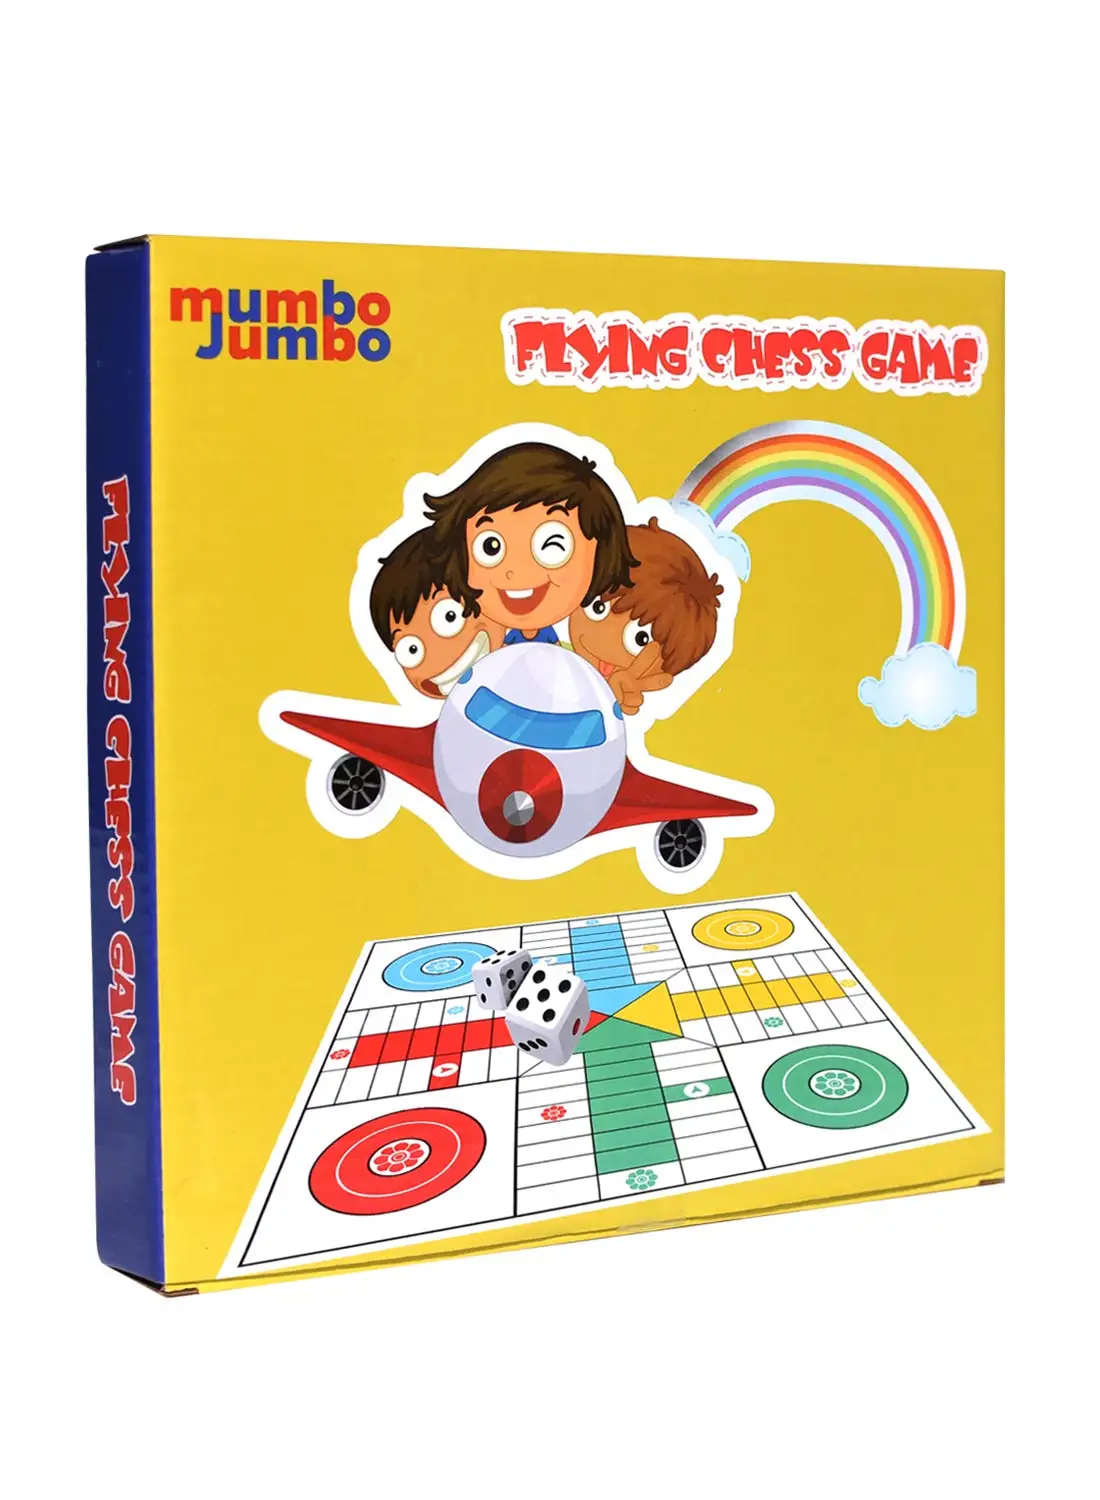 mumbo Jumbo Foldable Traditional Ludo Flying Chess Game With Magnificent Design, For Kid's 3 Years And Above, Game Of Excitement And Suspense 2 Players